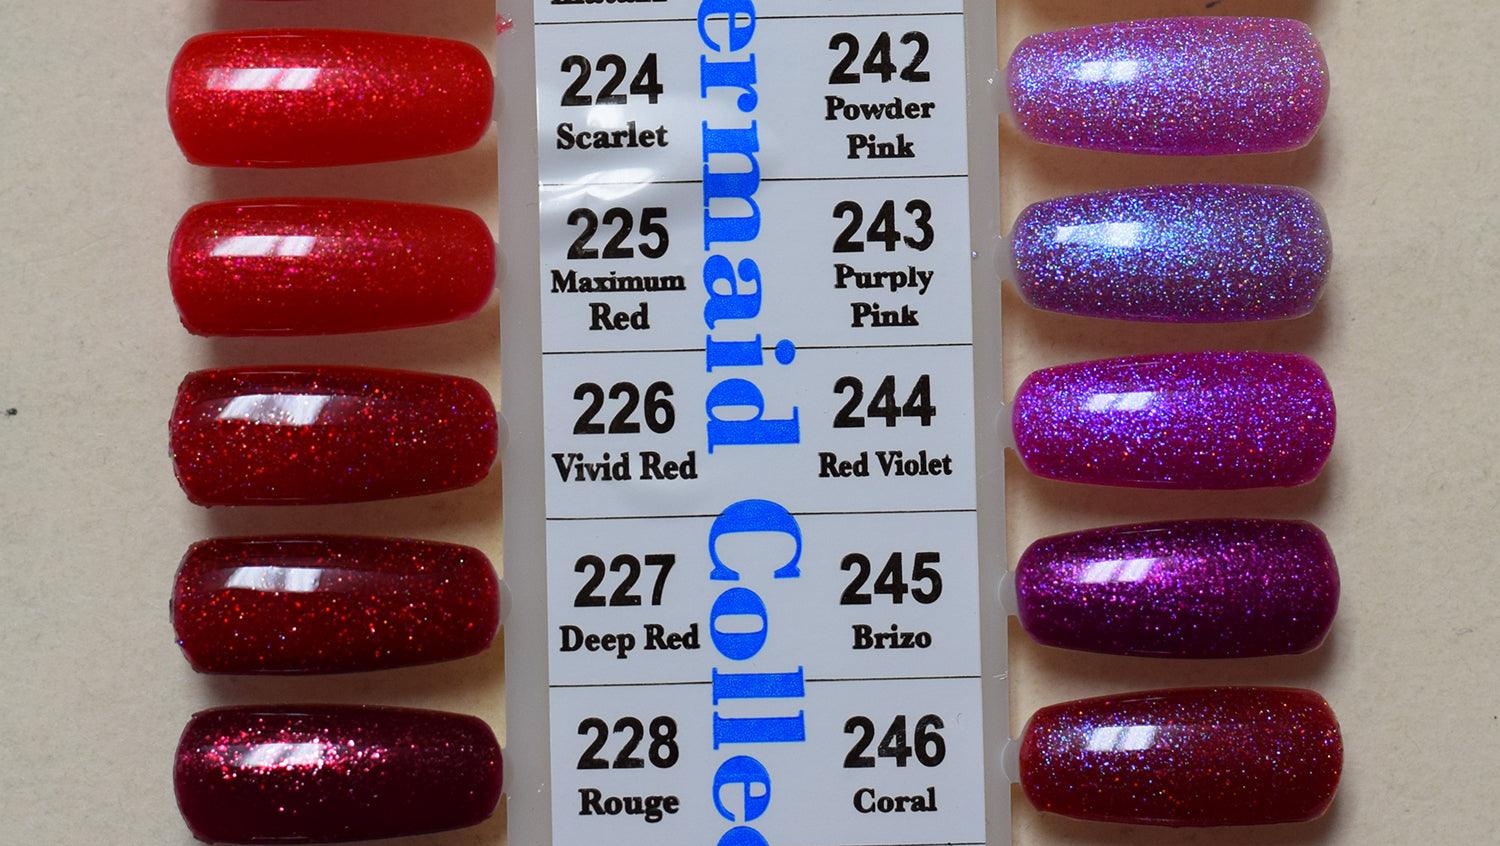 DND DC MERMAID Collection #243 Purply Pink